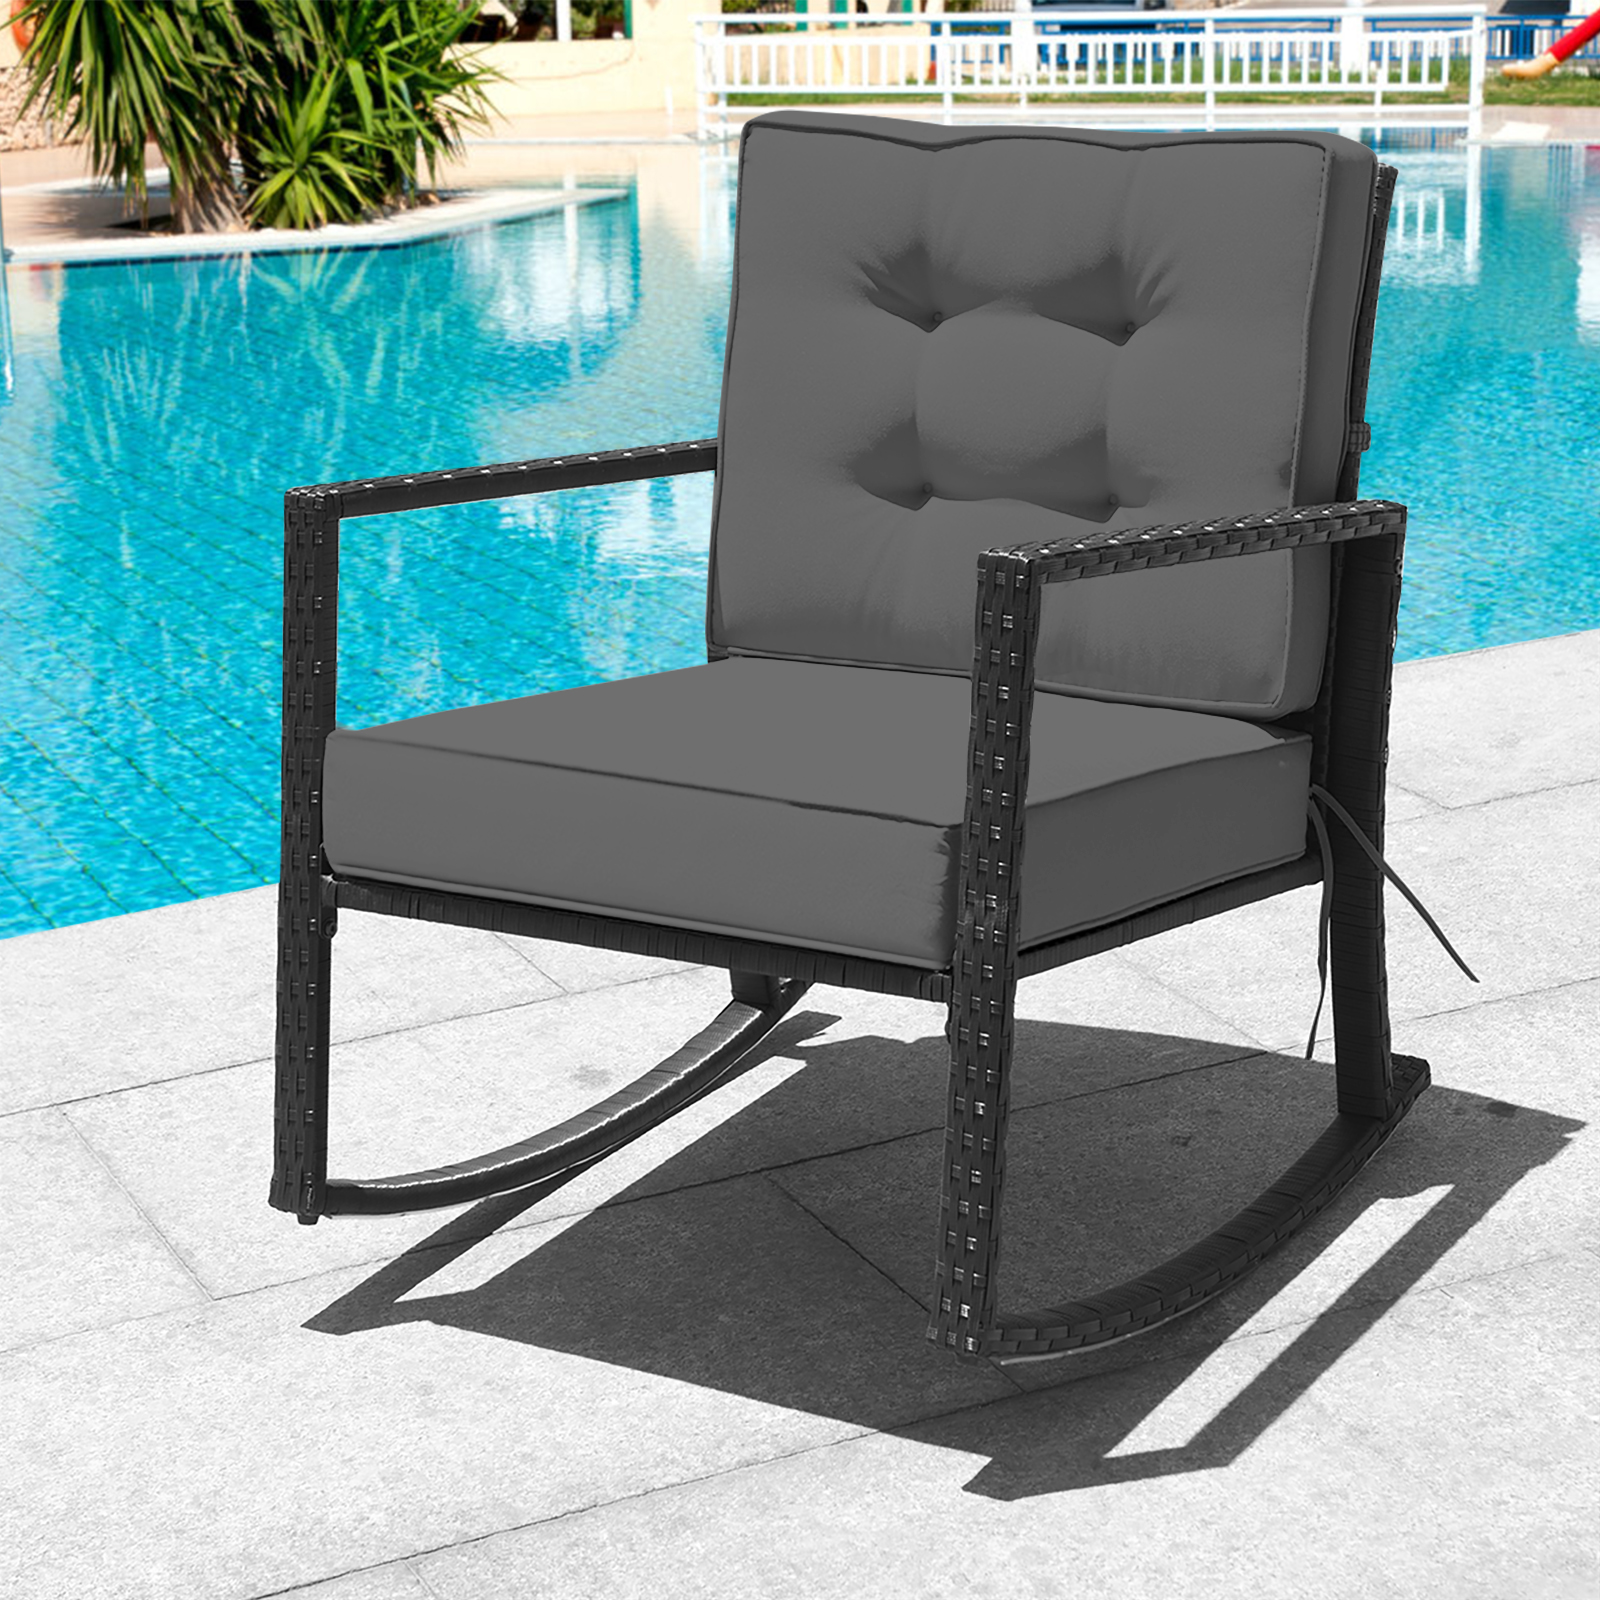 Patiojoy Outdoor Wicker Rocking Chair Glider Rattan Rocker Recliner with Grey Cushion - image 1 of 6